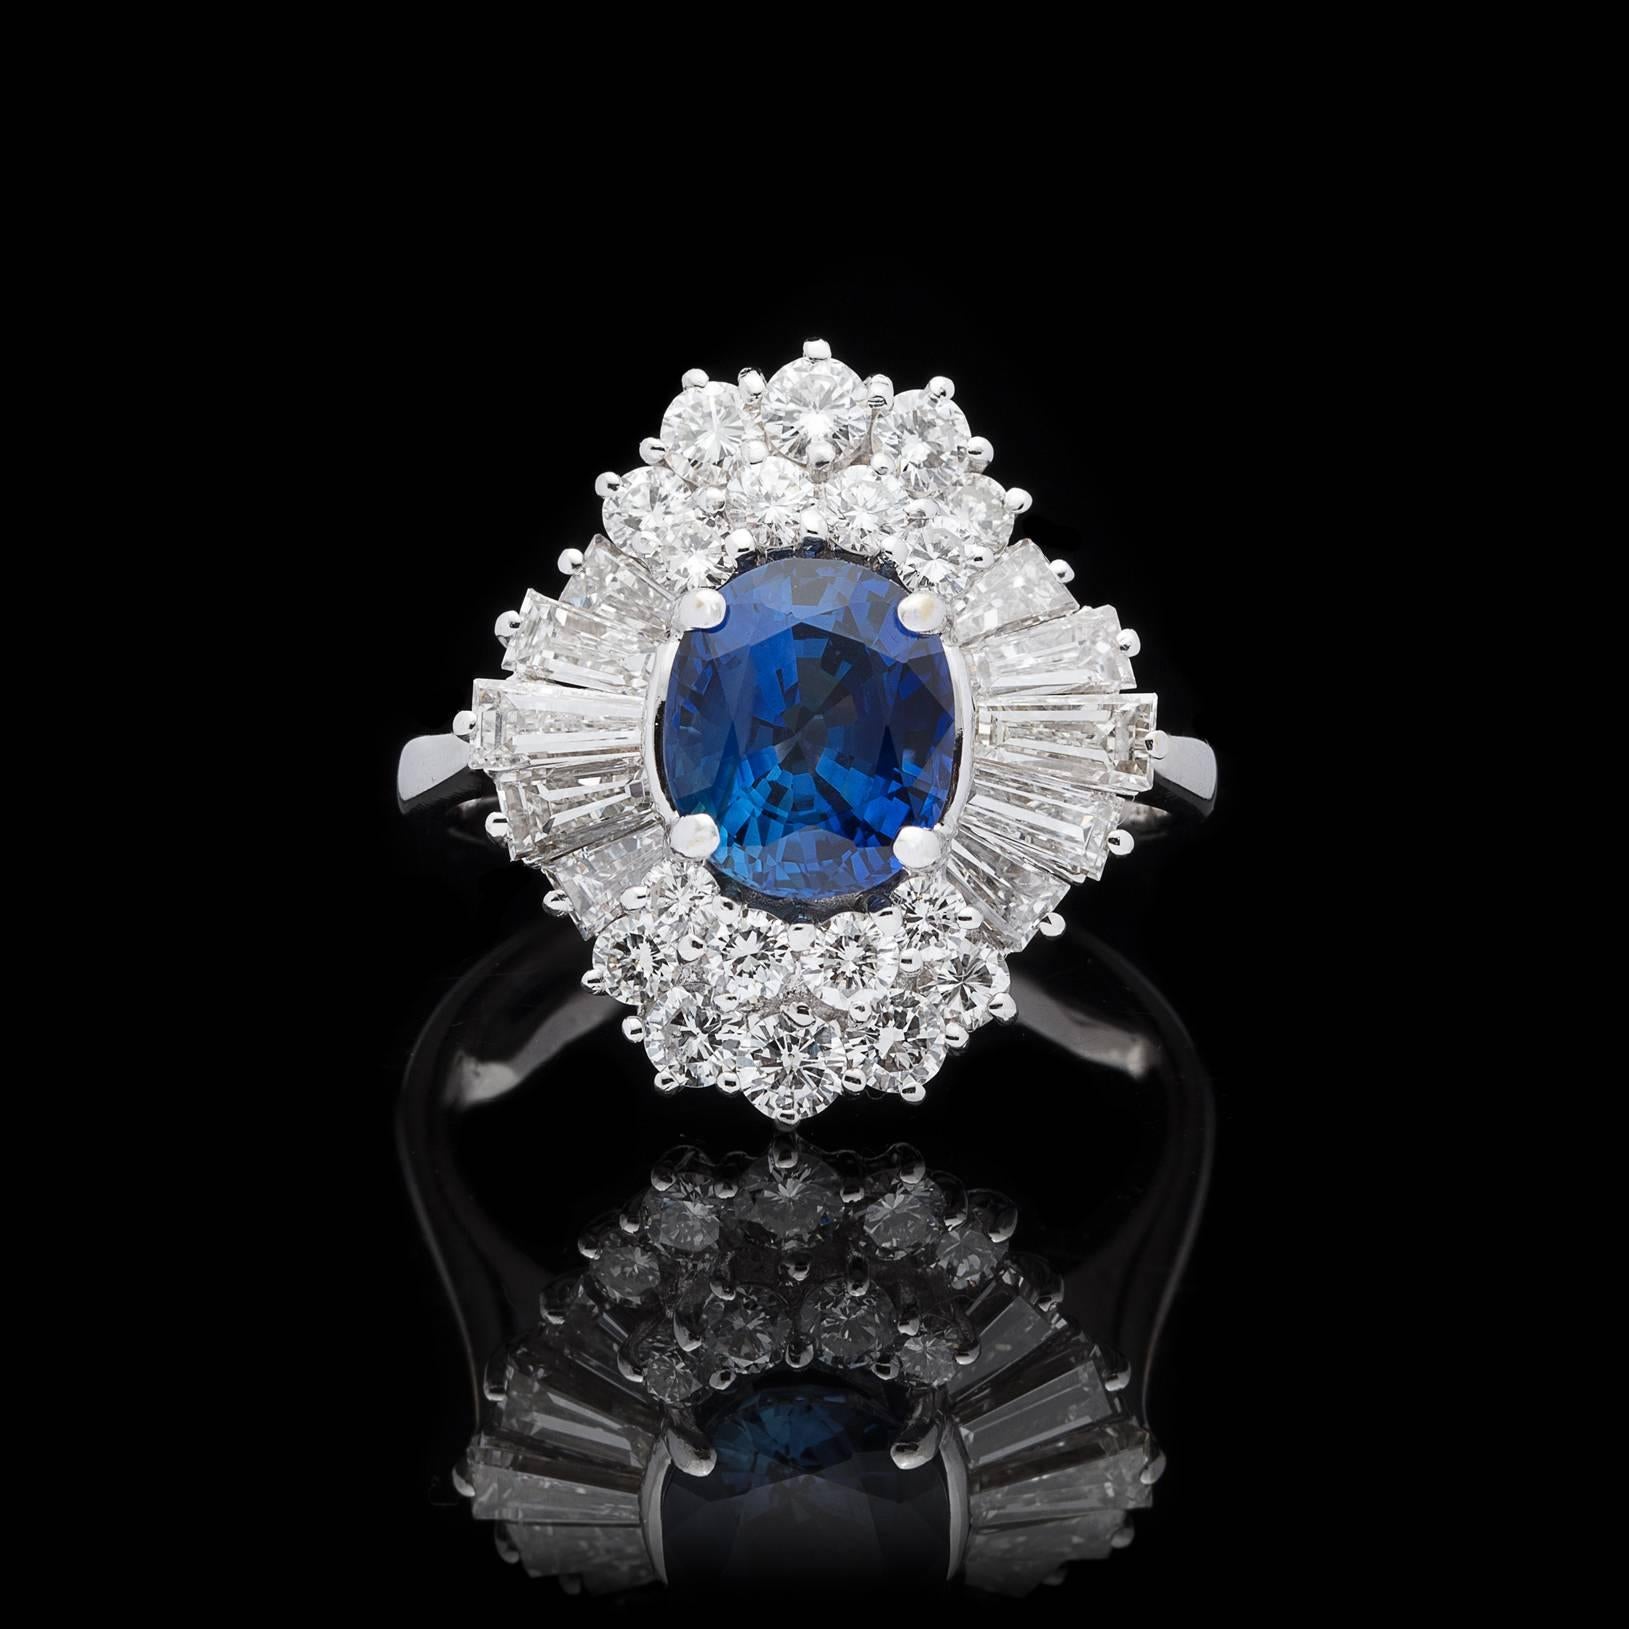 A timeless design featuring an exceptionally vibrant Oval Cut Blue Sapphire weighing approximately 2 carats, surrounded by approximately 1.76 carats of fine Round and Tapered Baguette Cut Diamonds. This white gold stunner weighs 7.2 grams, is